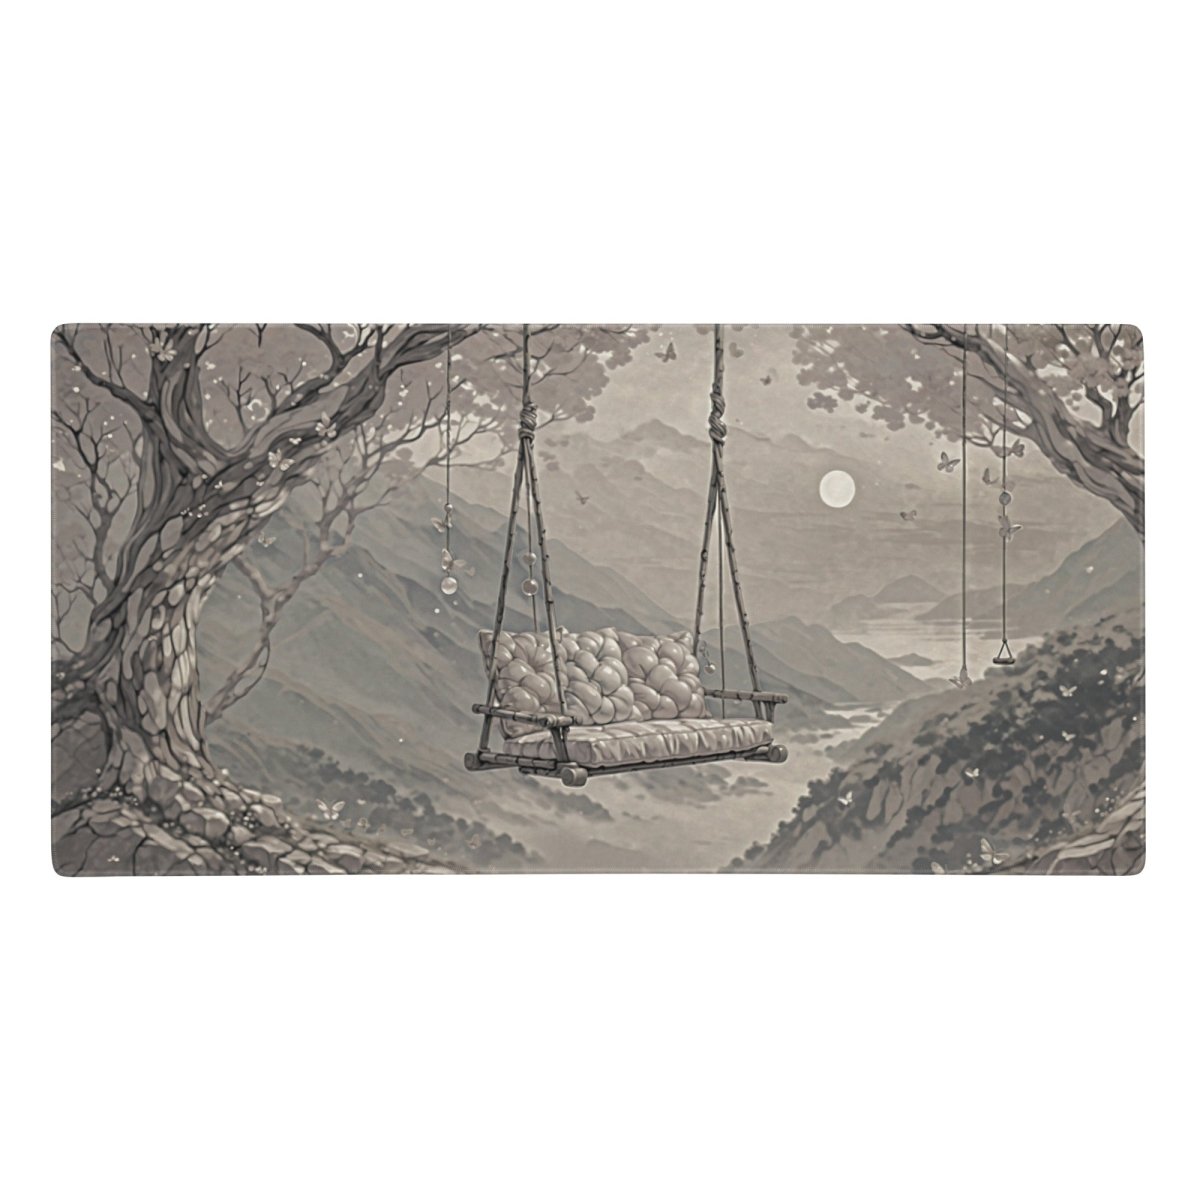 Tranquil retreat - Gaming mouse pad - Ever colorful